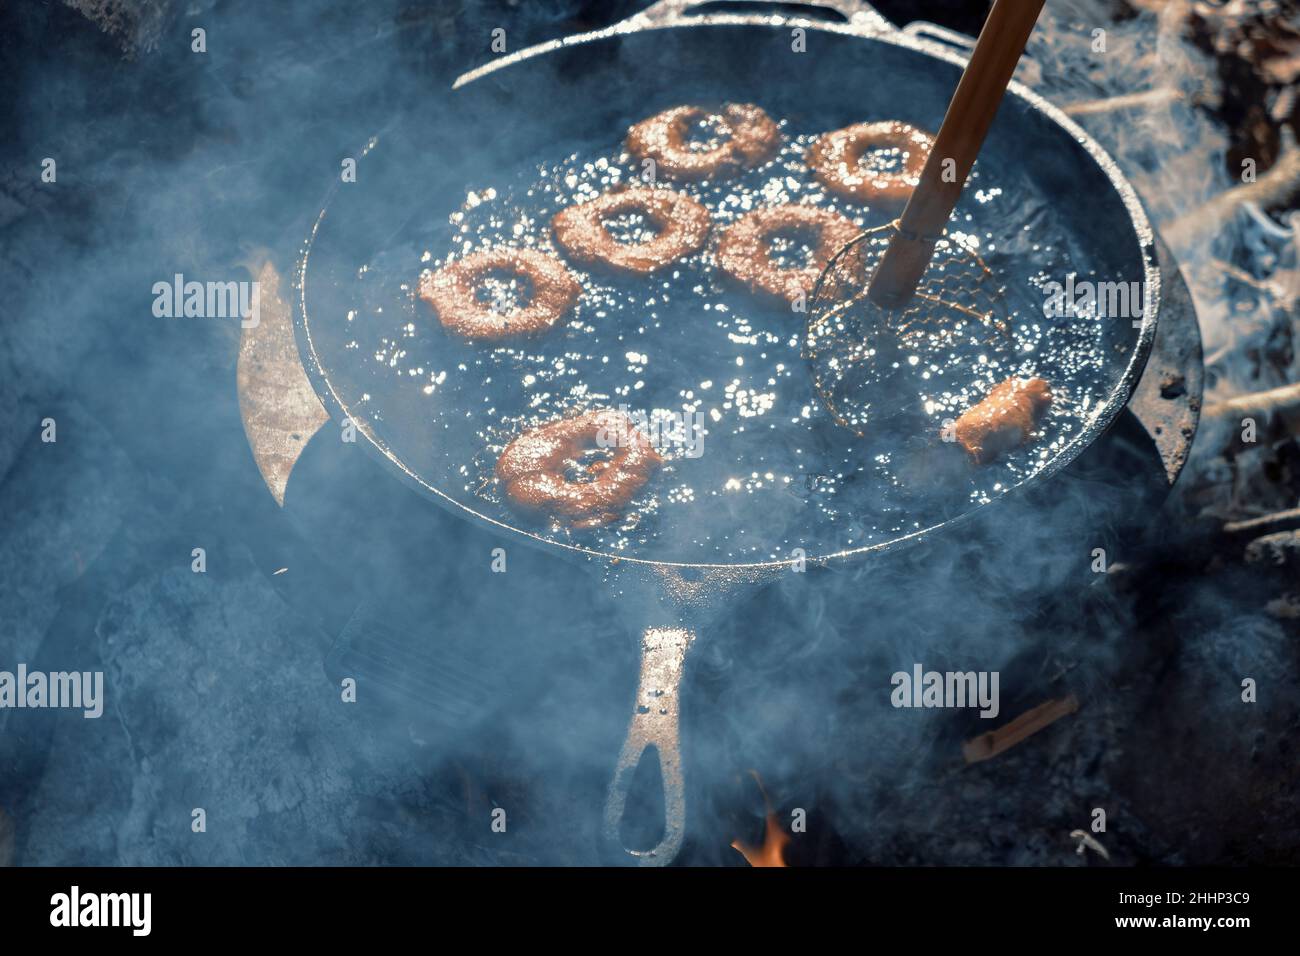 Homemade donuts frying in cast iron skillet outdoors at campsite. Stock Photo